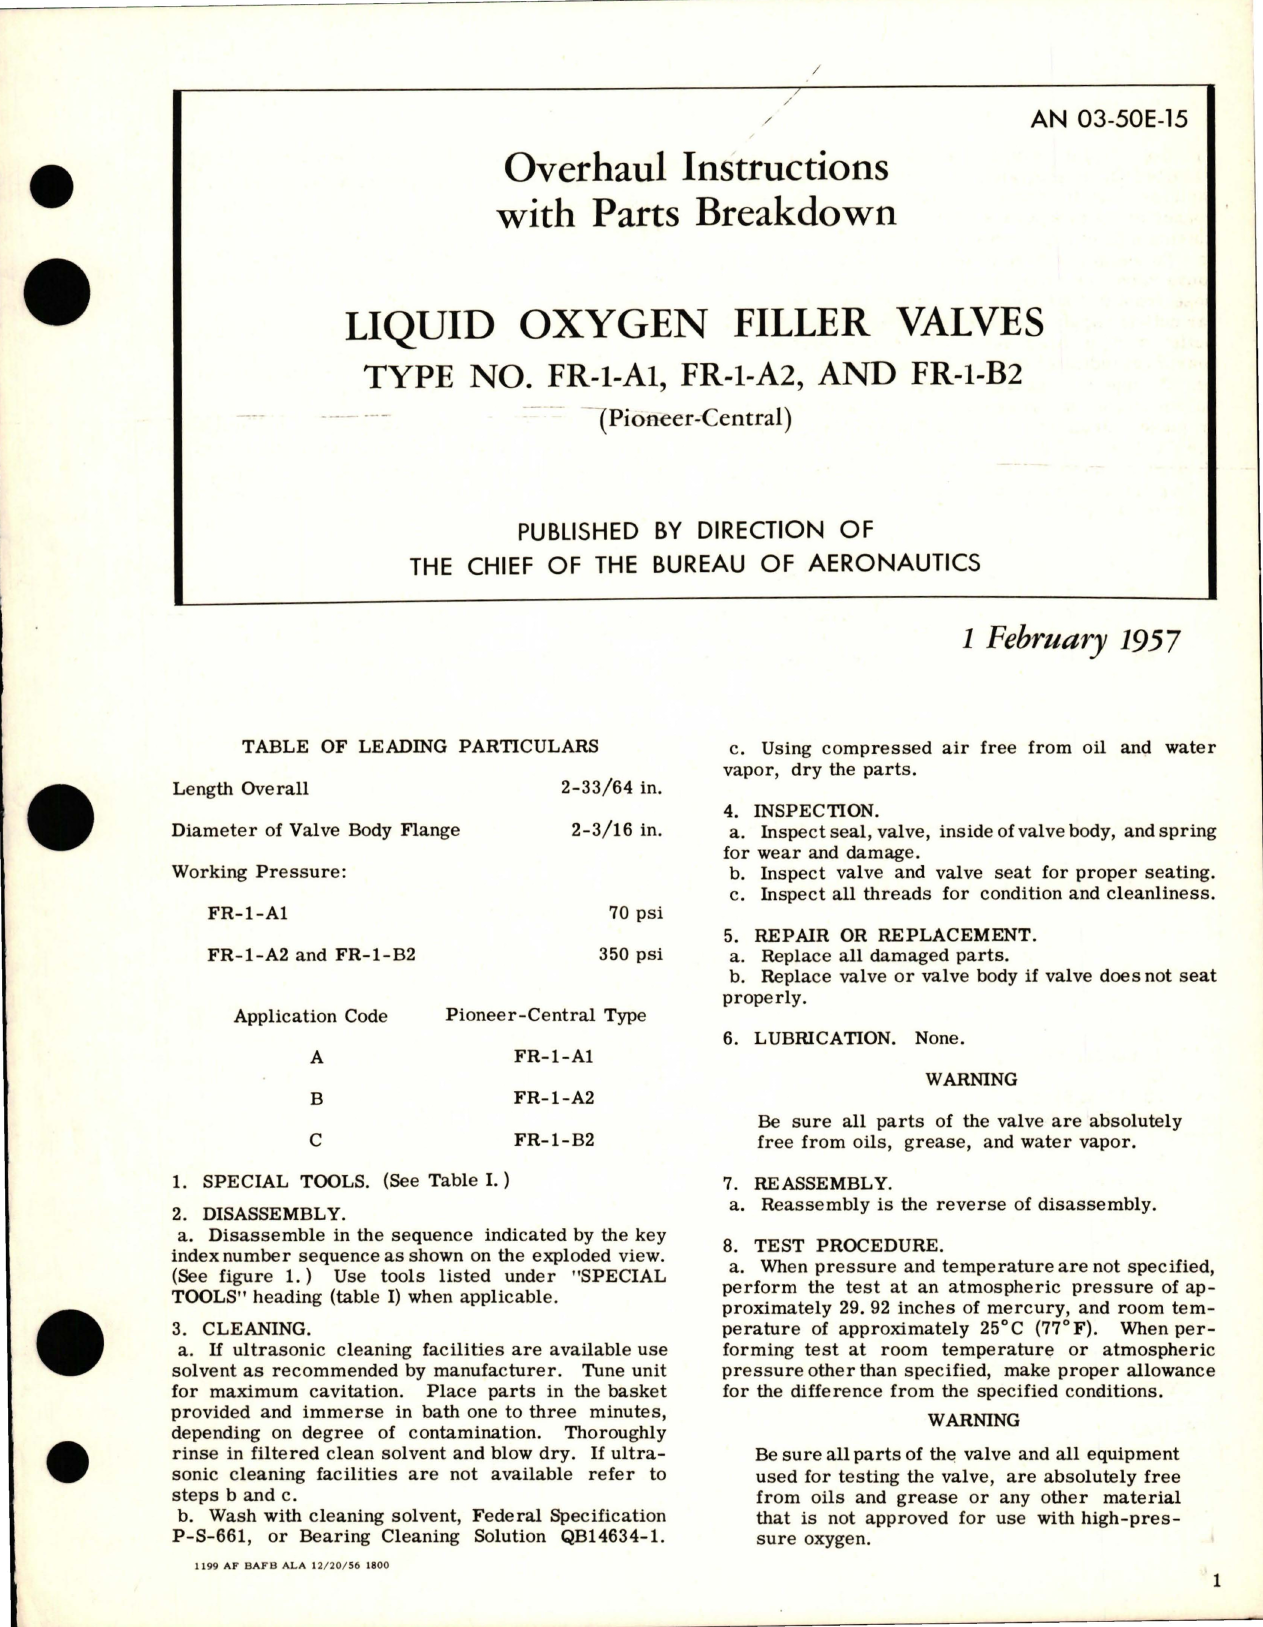 Sample page 1 from AirCorps Library document: Overhaul Instructions with Parts Breakdown for Liquid Oxygen Filler Valves - Types FR-1-A1, FR-1-A2, and FR-1-B2